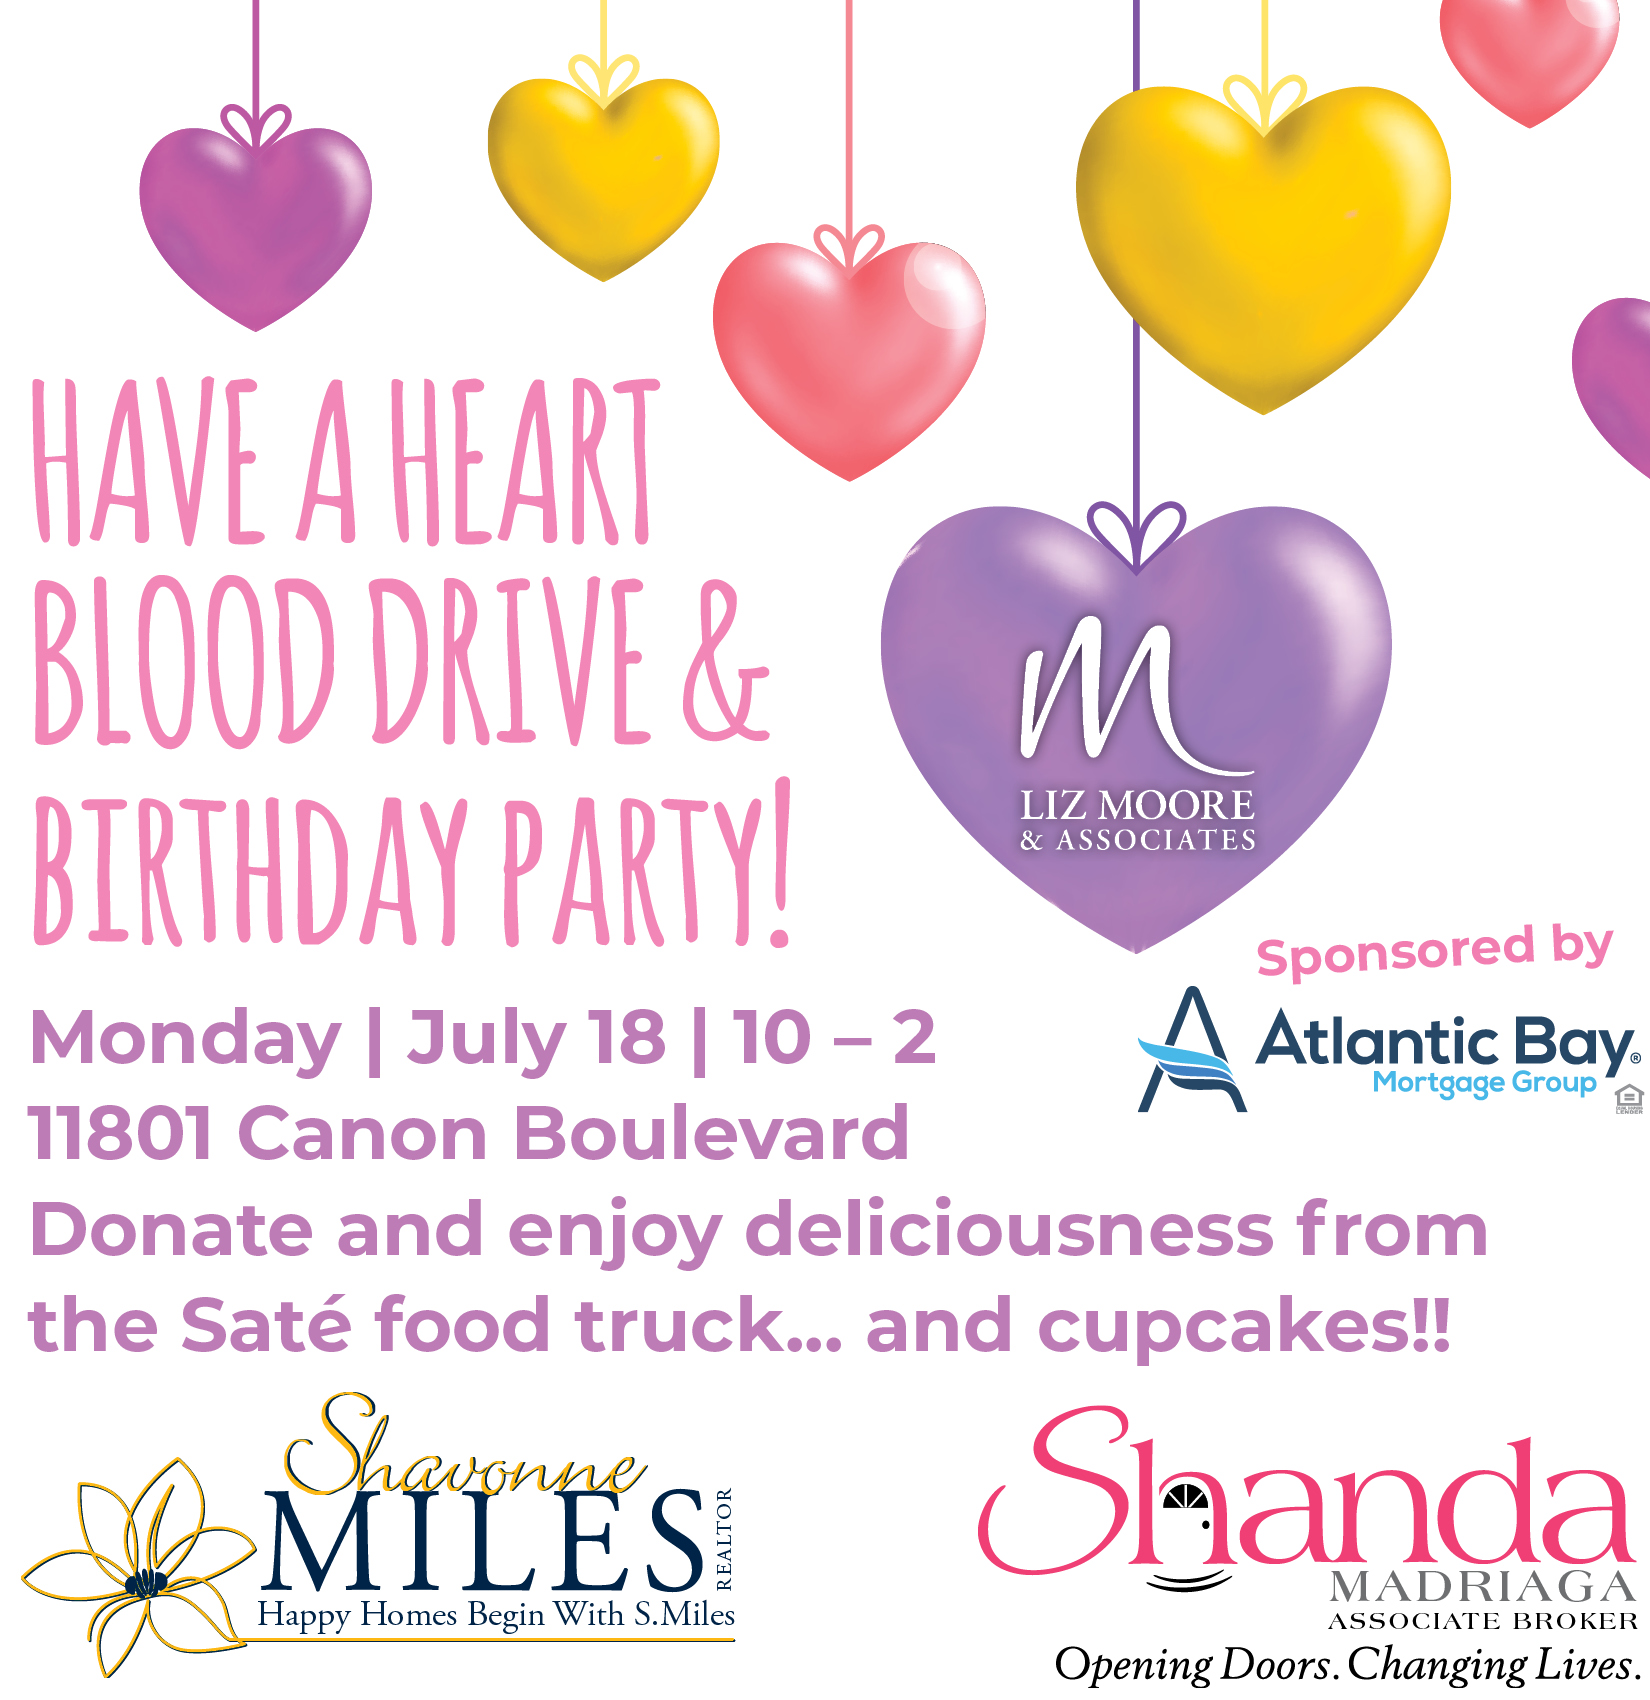 Donate Blood at Liz Moore Newport News Office on July 18th in Celebration of Agents' Birthdays